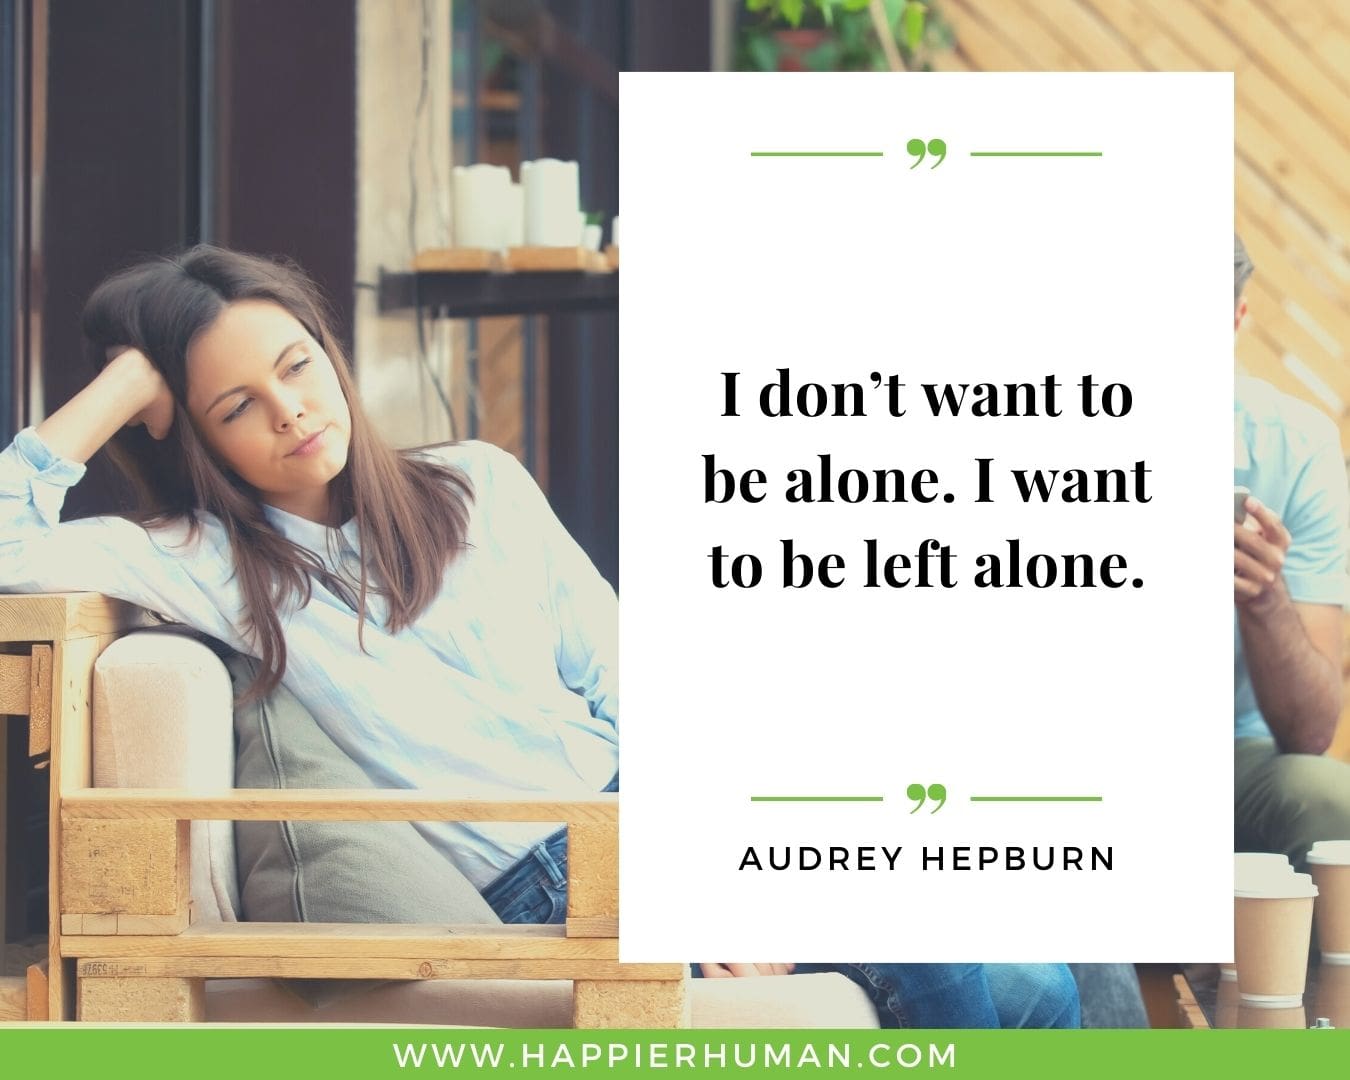 Introvert Quotes - “I don’t want to be alone. I want to be left alone.” – Audrey Hepburn